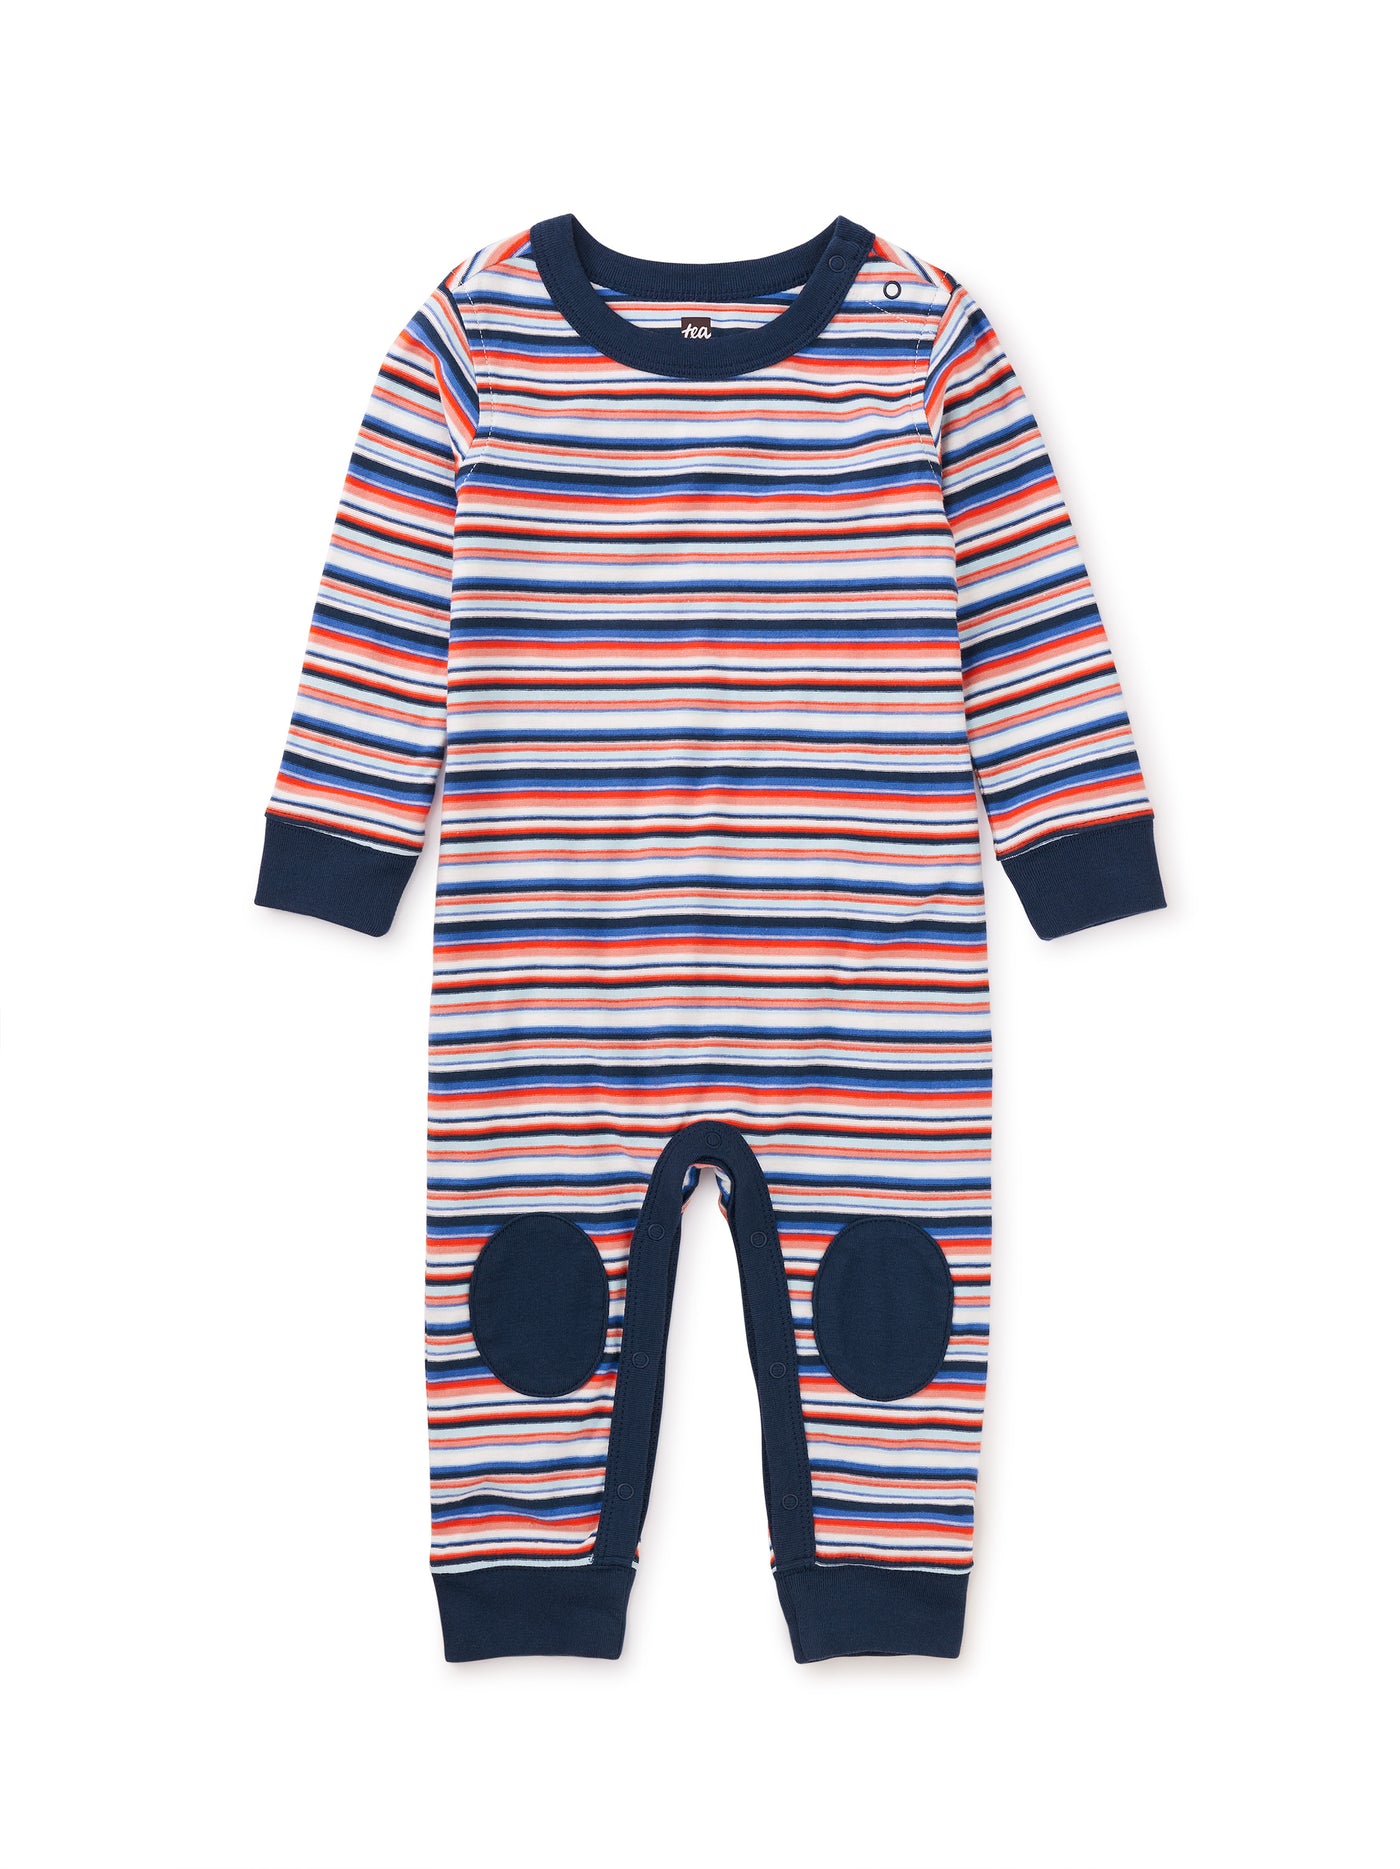 Tea Collection Stripe Knee Patch Baby Romper